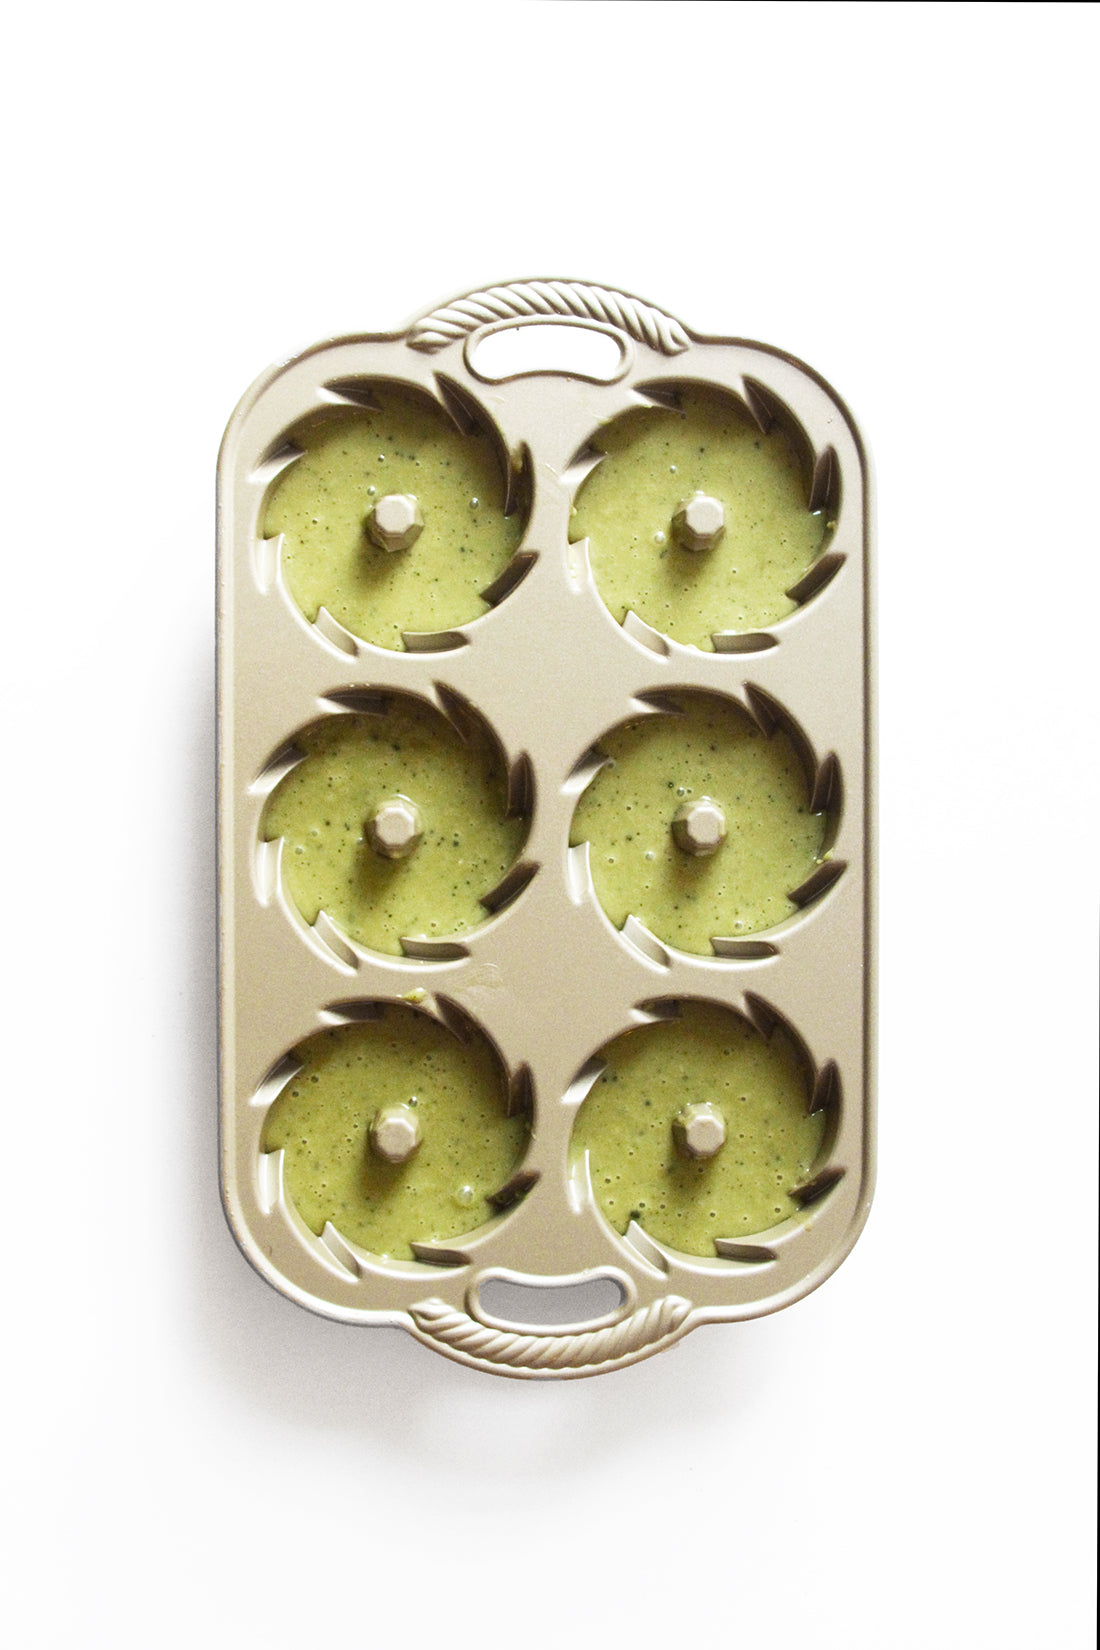 Image from above of Miss Jones Baking Co Matcha Tea Cakes batter in six cake molds